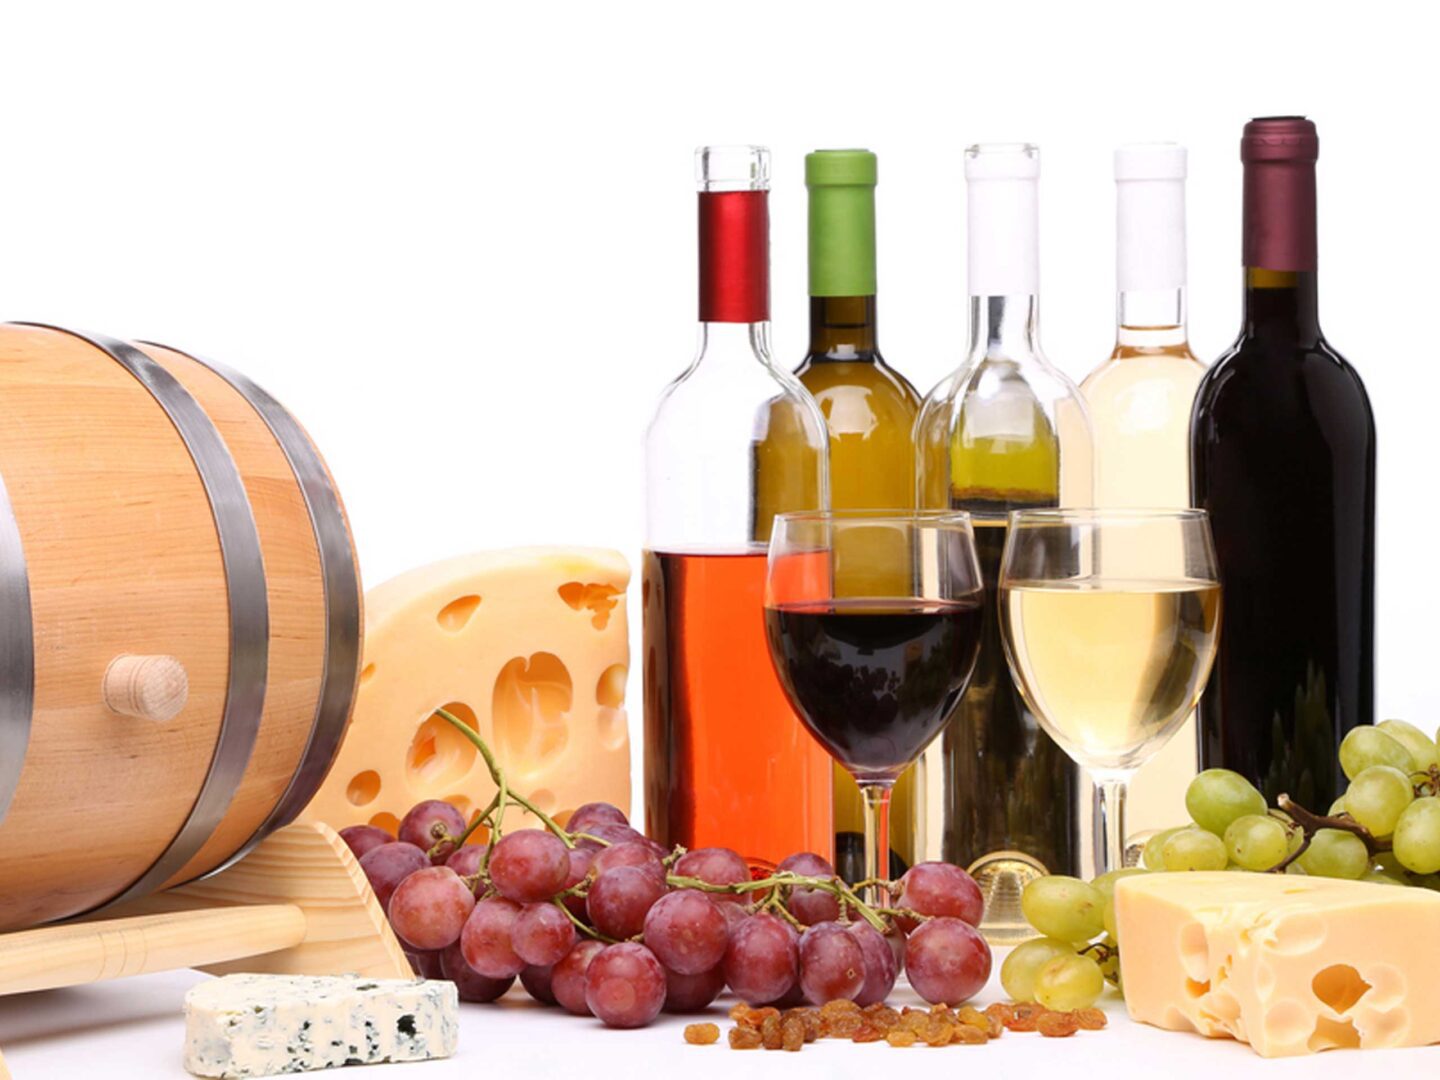 A table topped with wine and cheese next to grapes.